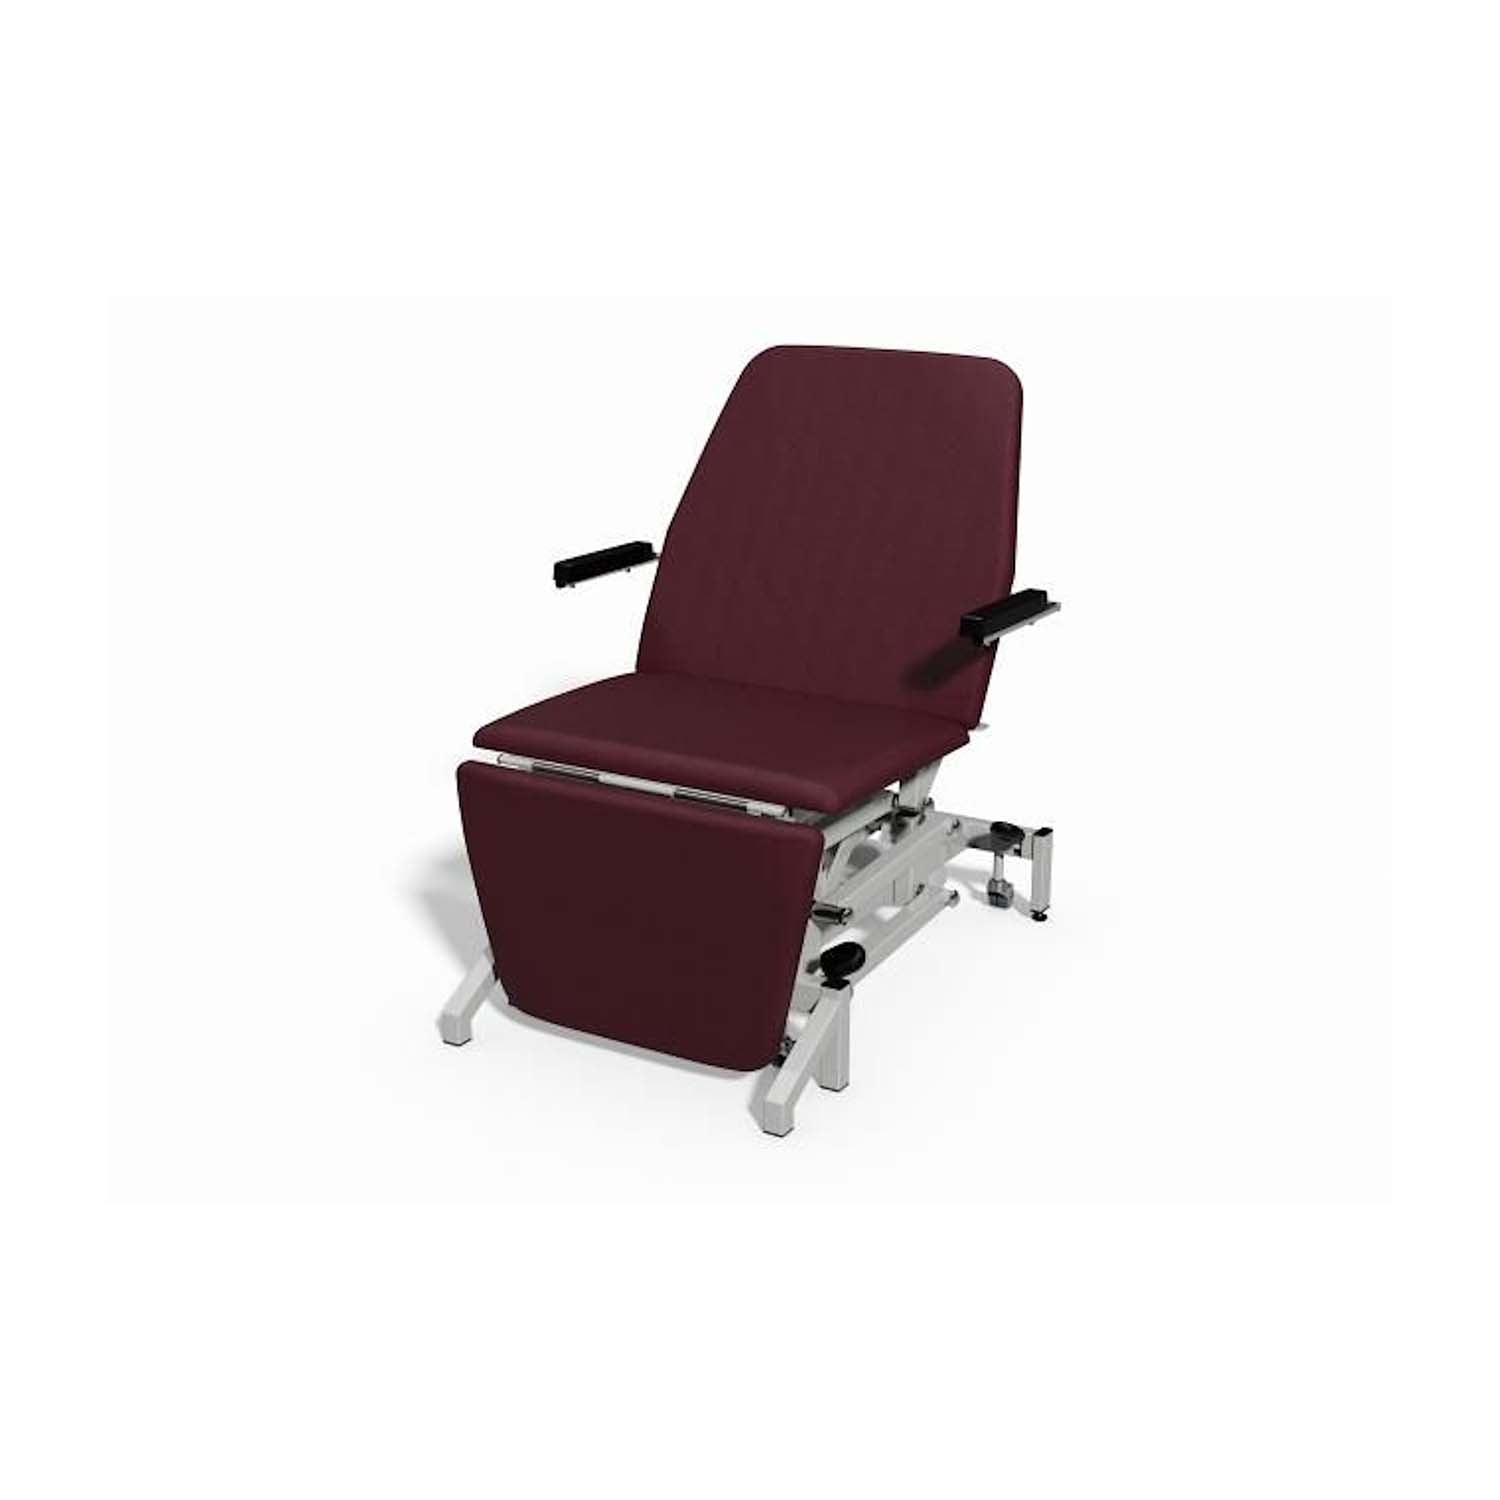 Plinth 2000 Model 50CT Tilting Bariatric Podiatry Chair | Mulled Wine